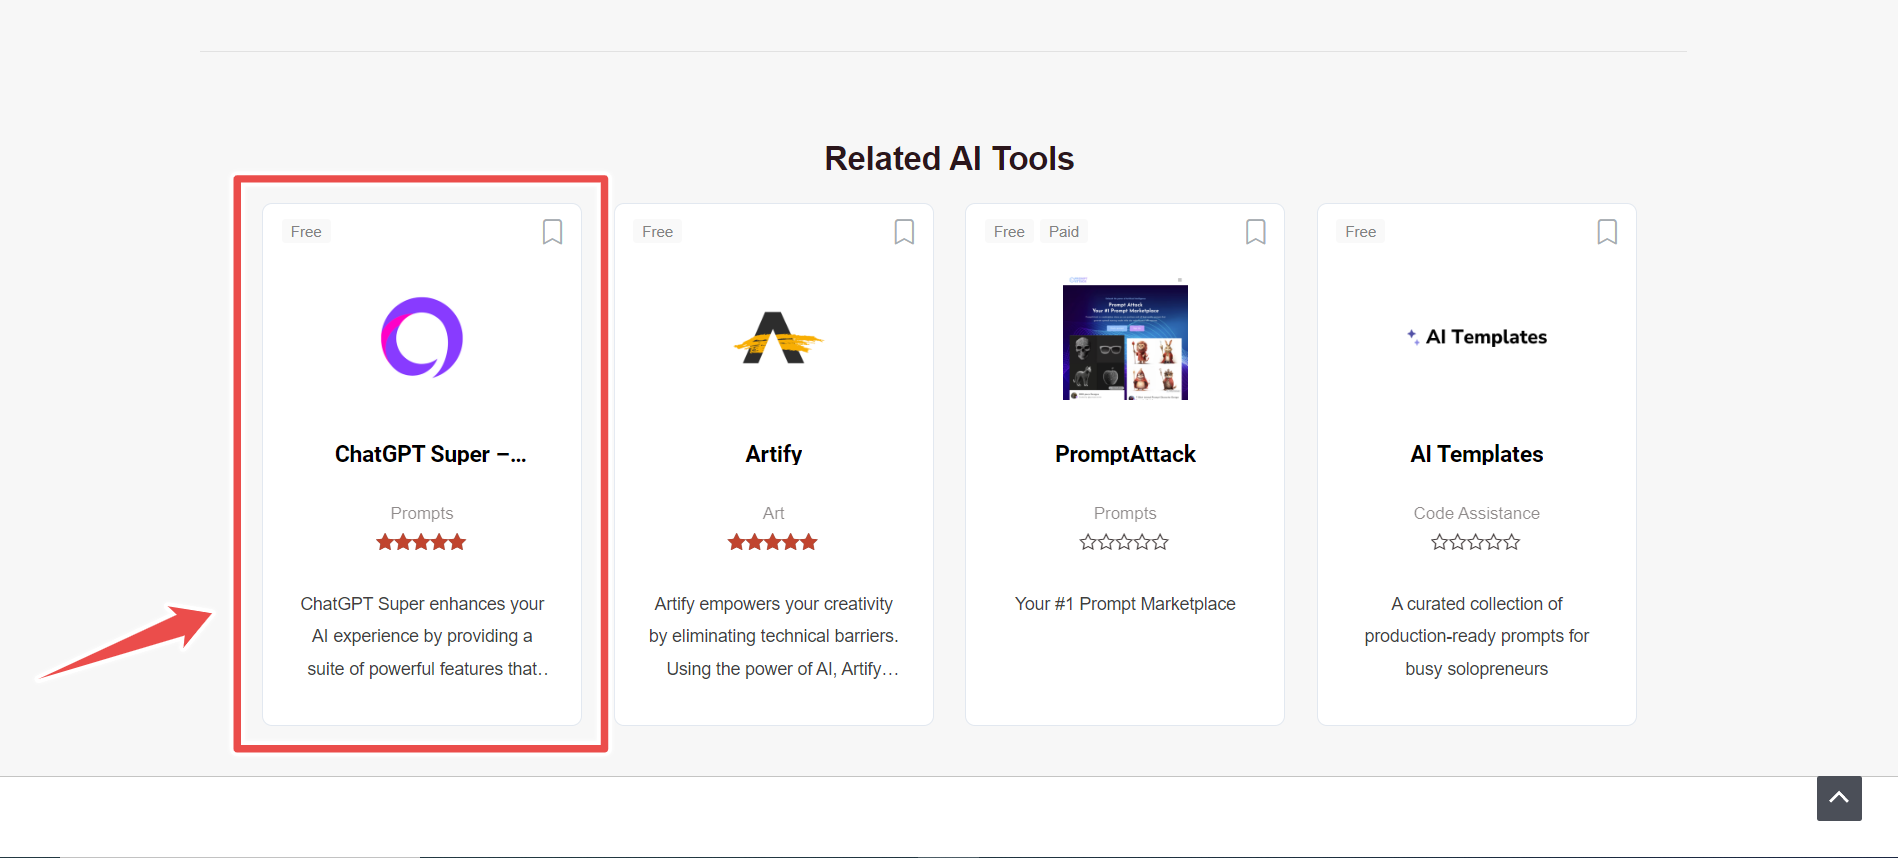 Top Ranked At Related AI Tools